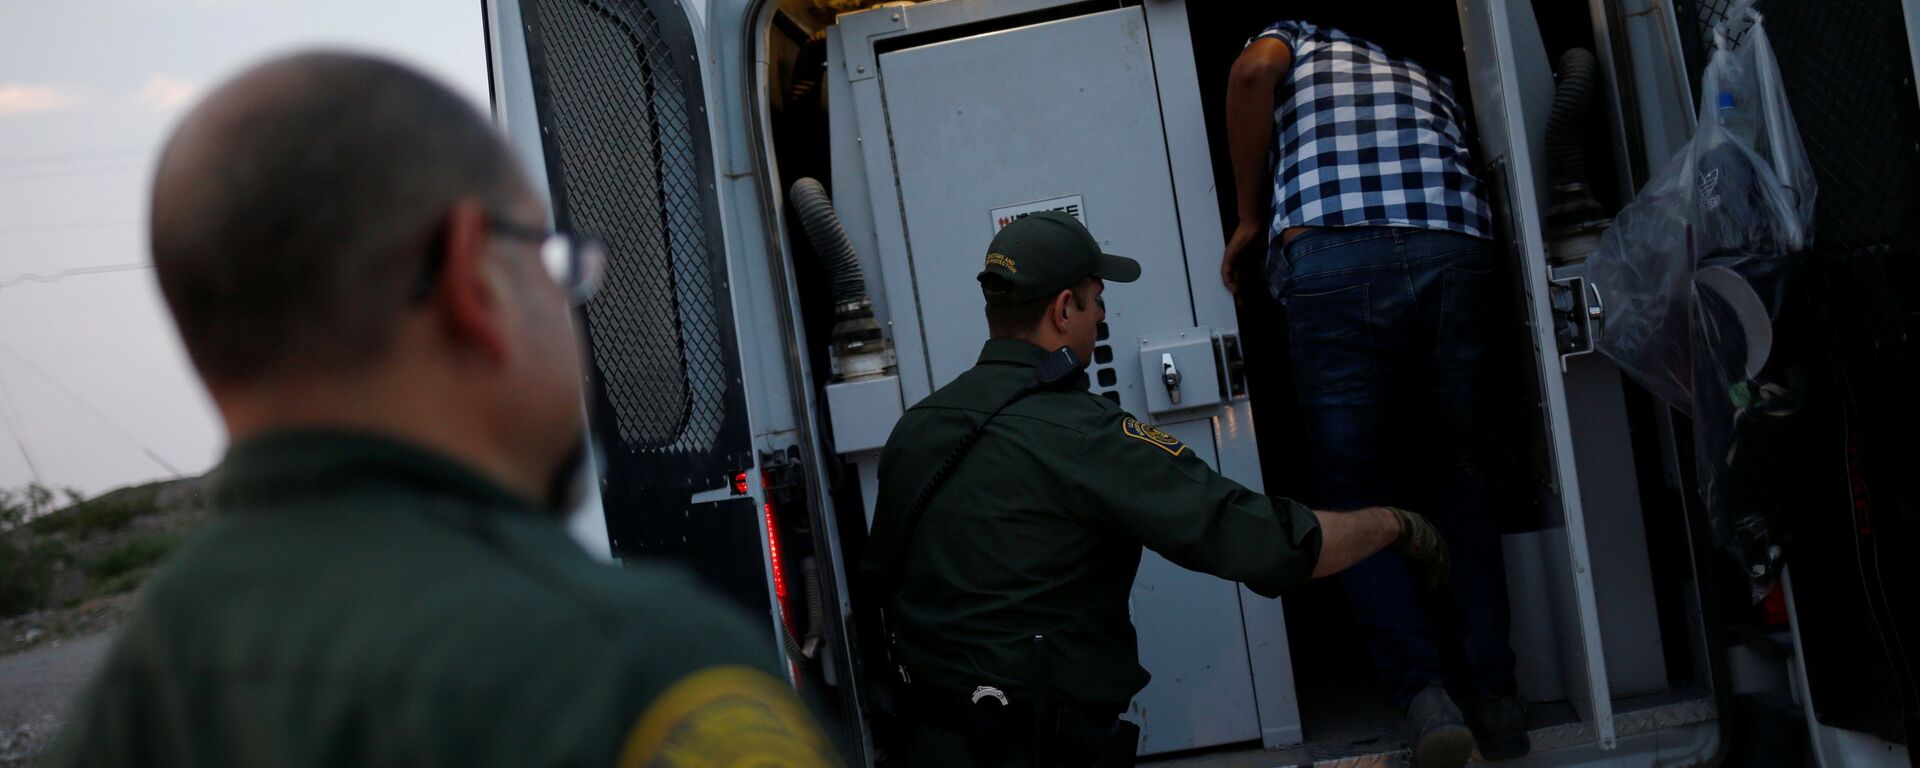 A migrant from Central America is detained by U.S. Border Patrol agents after crossing into the United States from Mexico, in Sunland Park, New Mexico, U.S., July 22, 2021 - Sputnik International, 1920